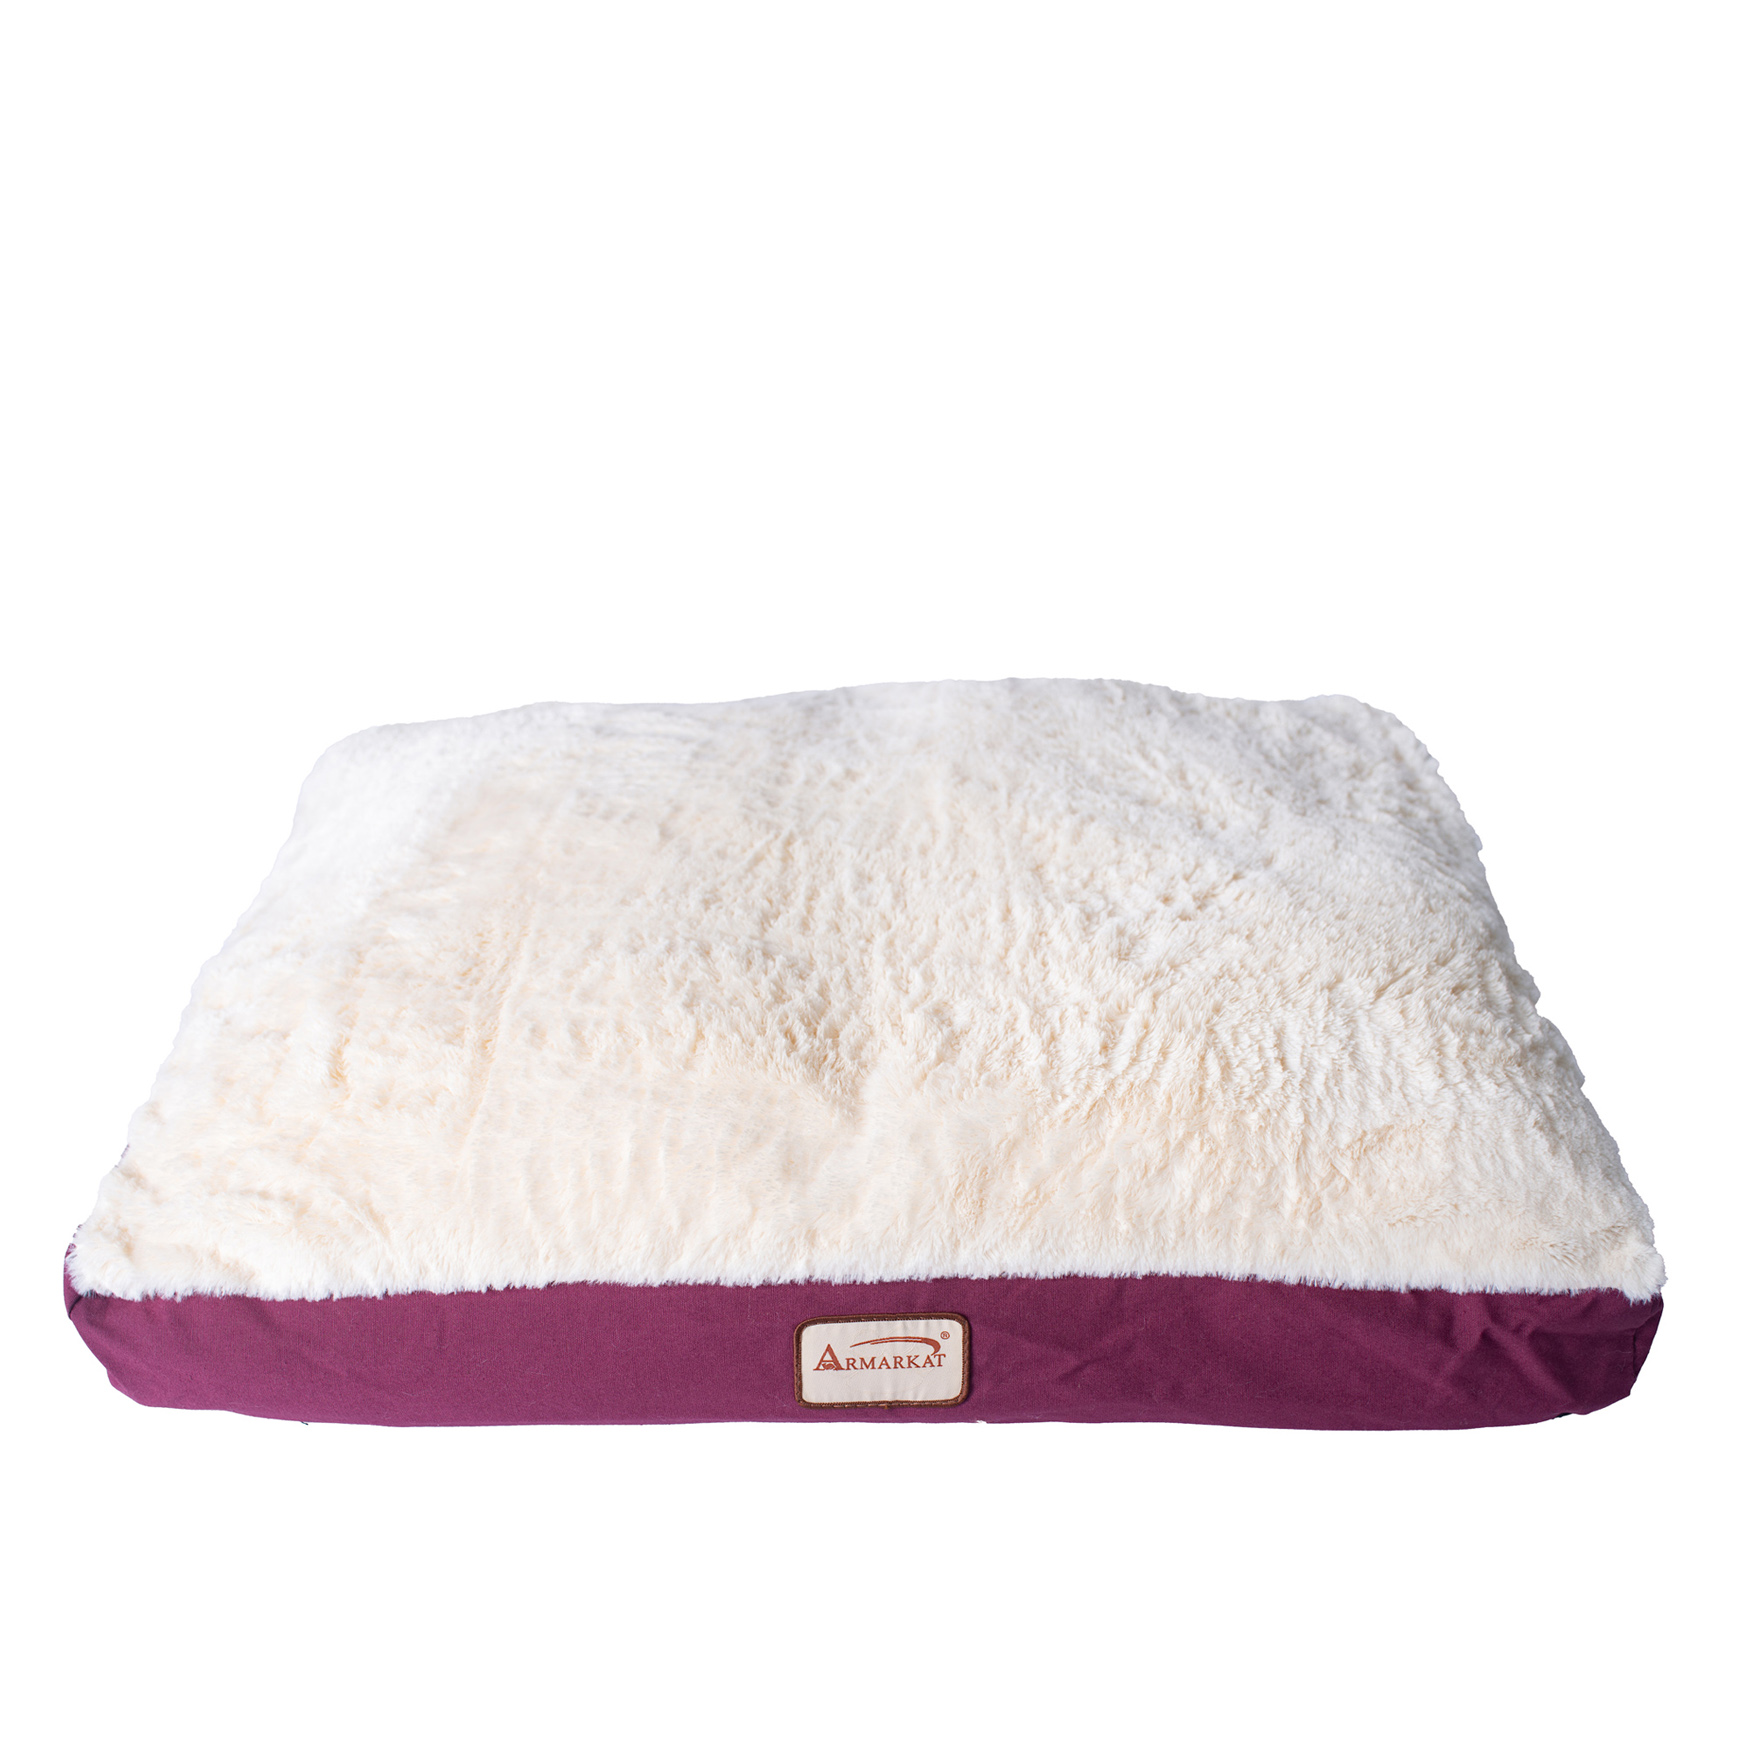 Double Extra Large Pet Dog Bed Mat With Poly Fill Cushion And Removable Cover, IVORY BURGUNDY